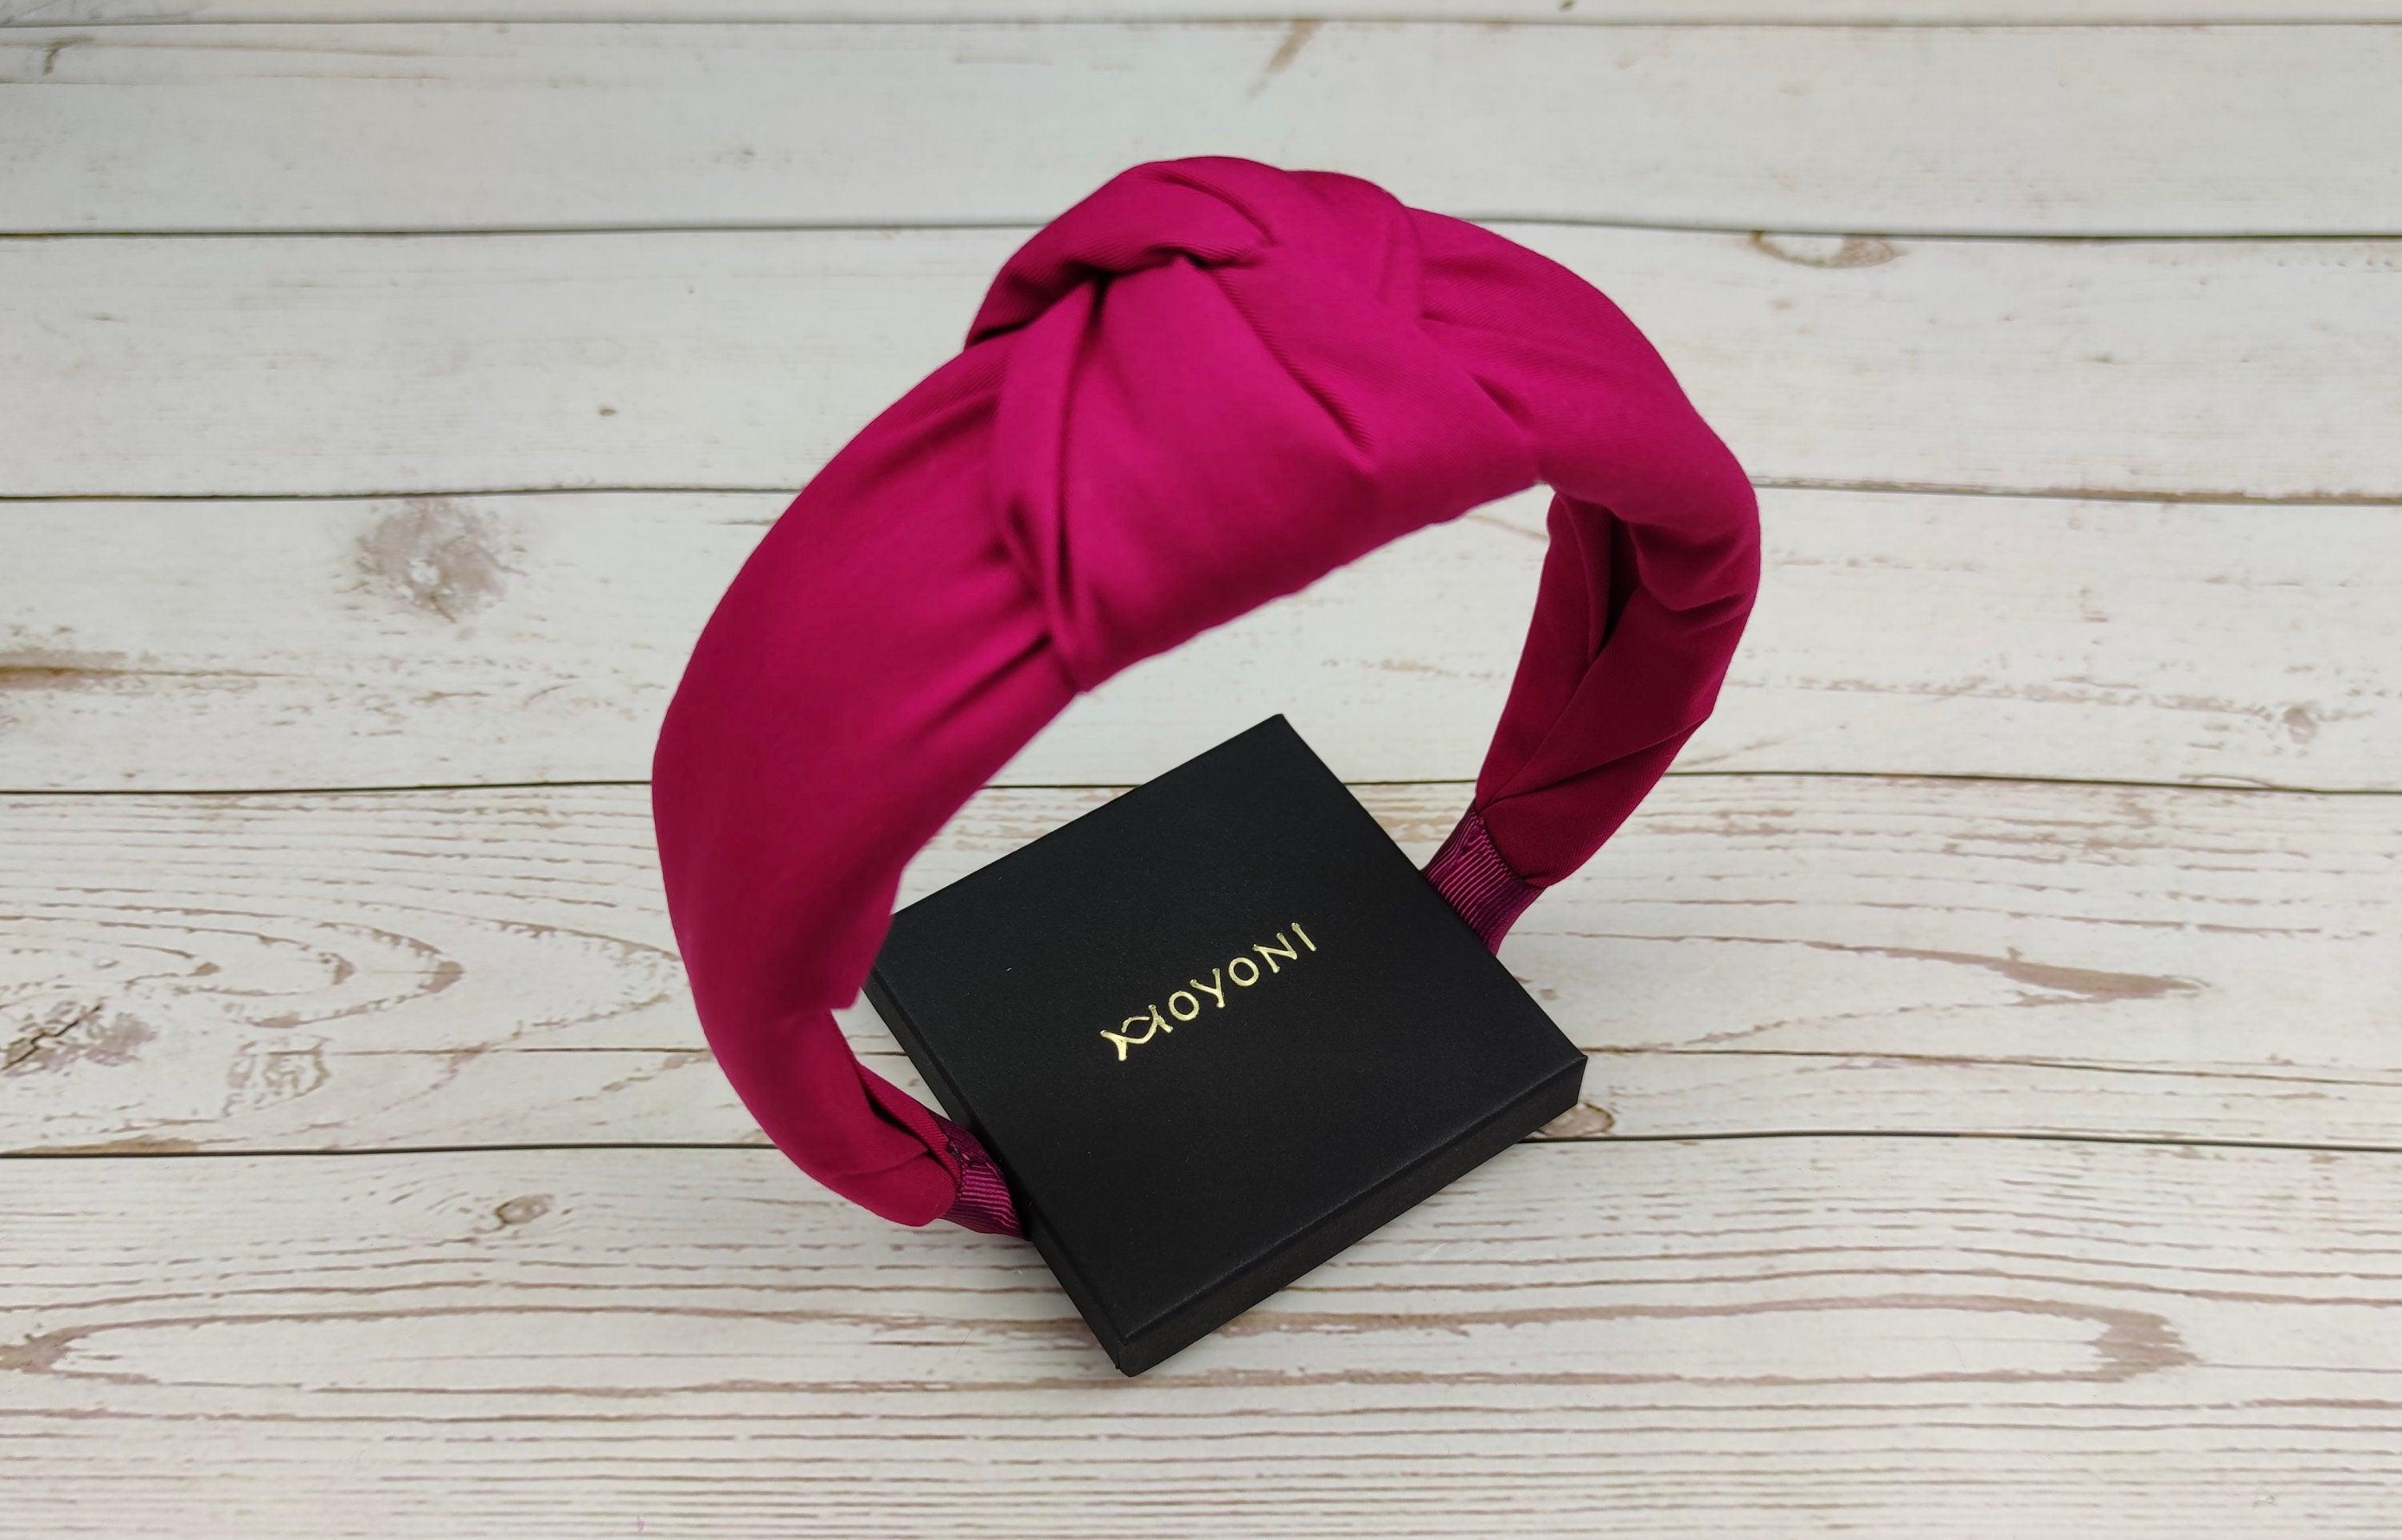 Charming Fuschia Pink Color Crepe Headband, Knotted Headband, Women Headband, Headband for Girl, Cyclamen Pink Turban Hairband with Padded available at Moyoni Design